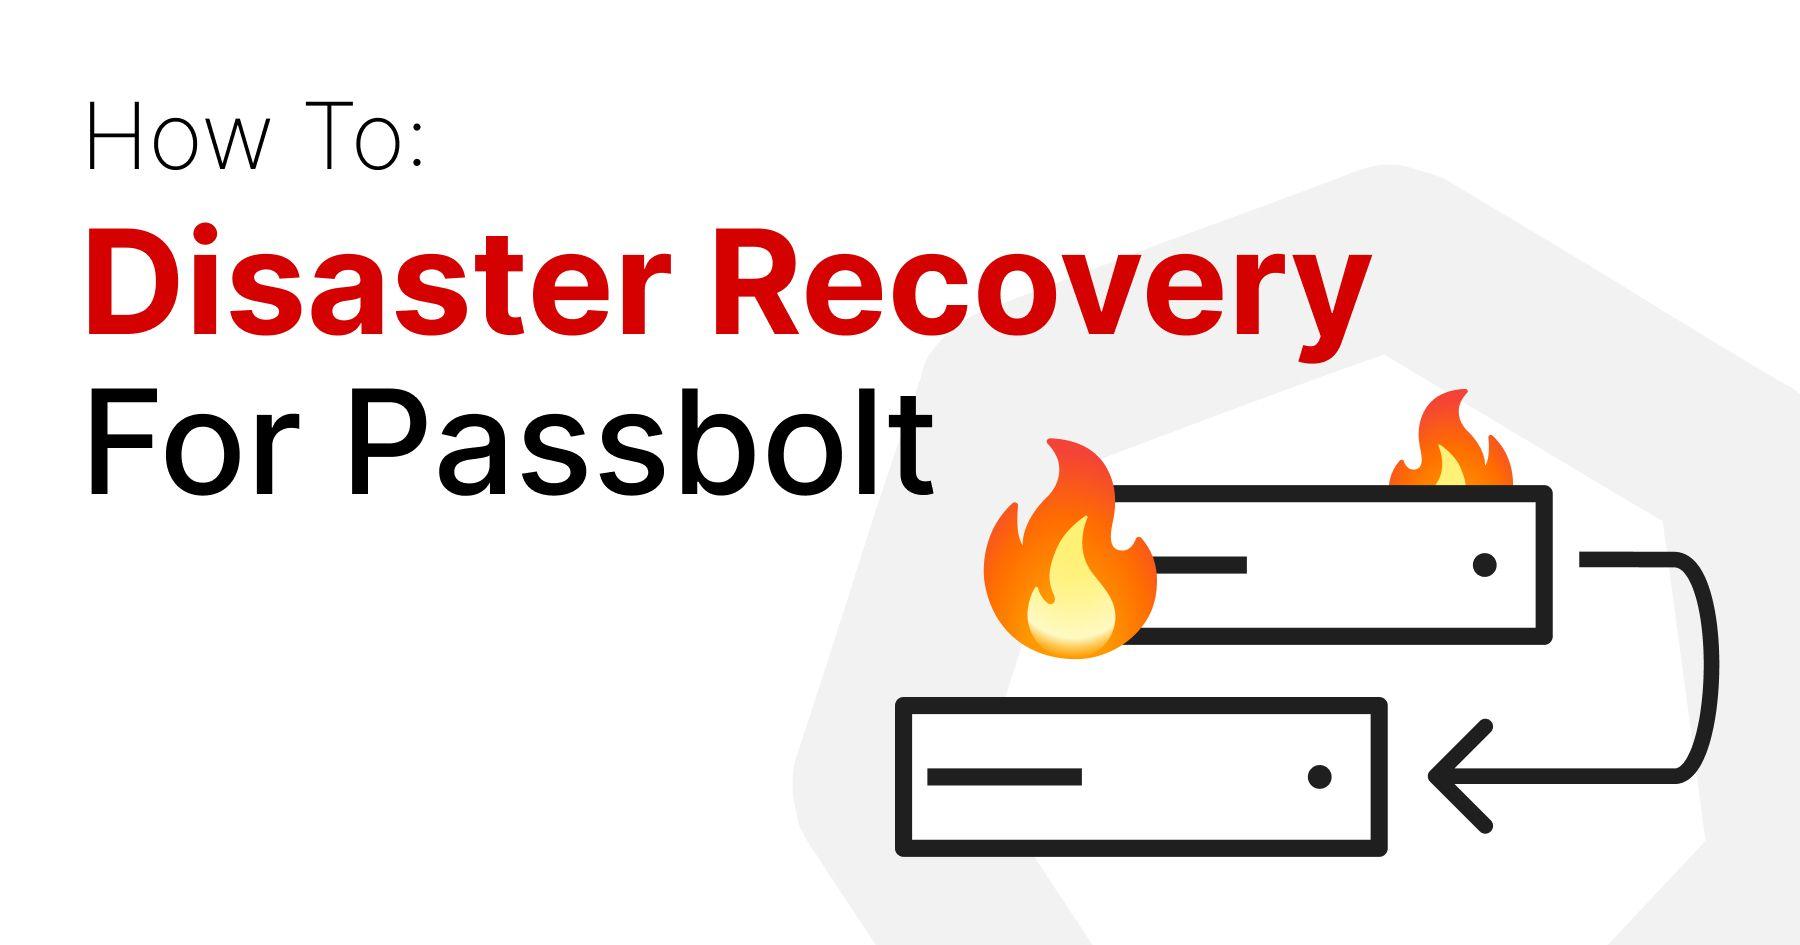 Disaster Recovery For Passbolt